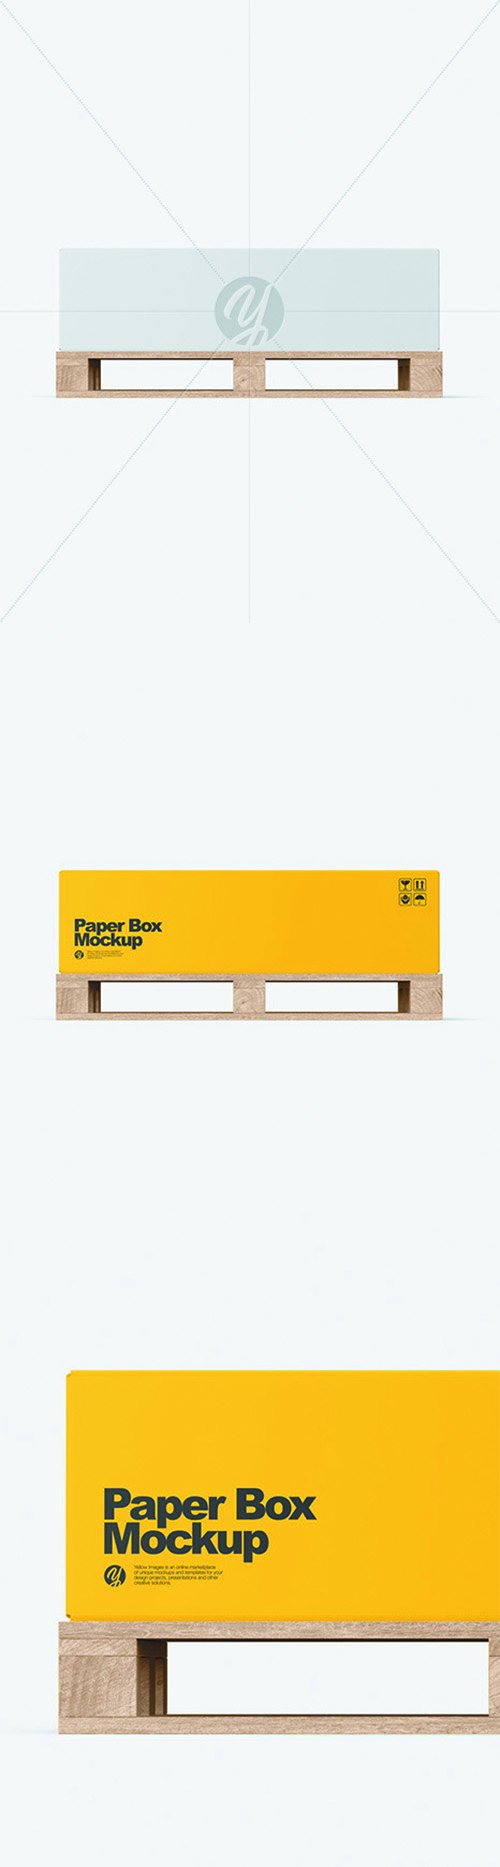 Wooden Pallet With Paper Box Mockup 66355 TIF